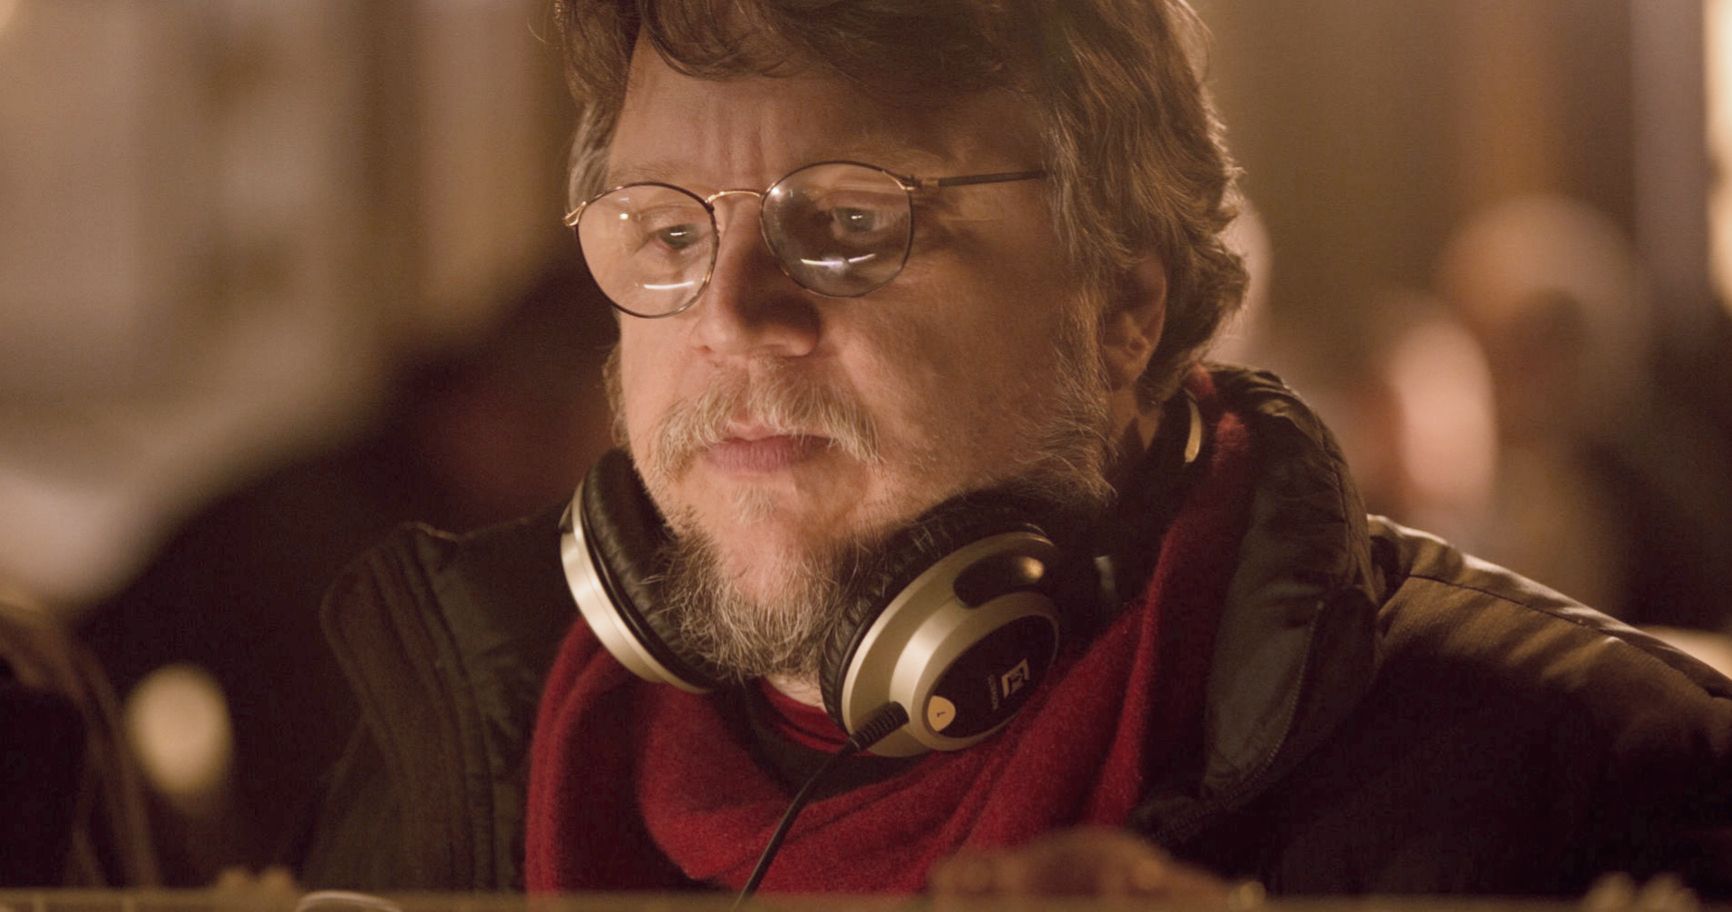 Guillermo Del Toro Gets His Star on the Hollywood Walk of Fame This August